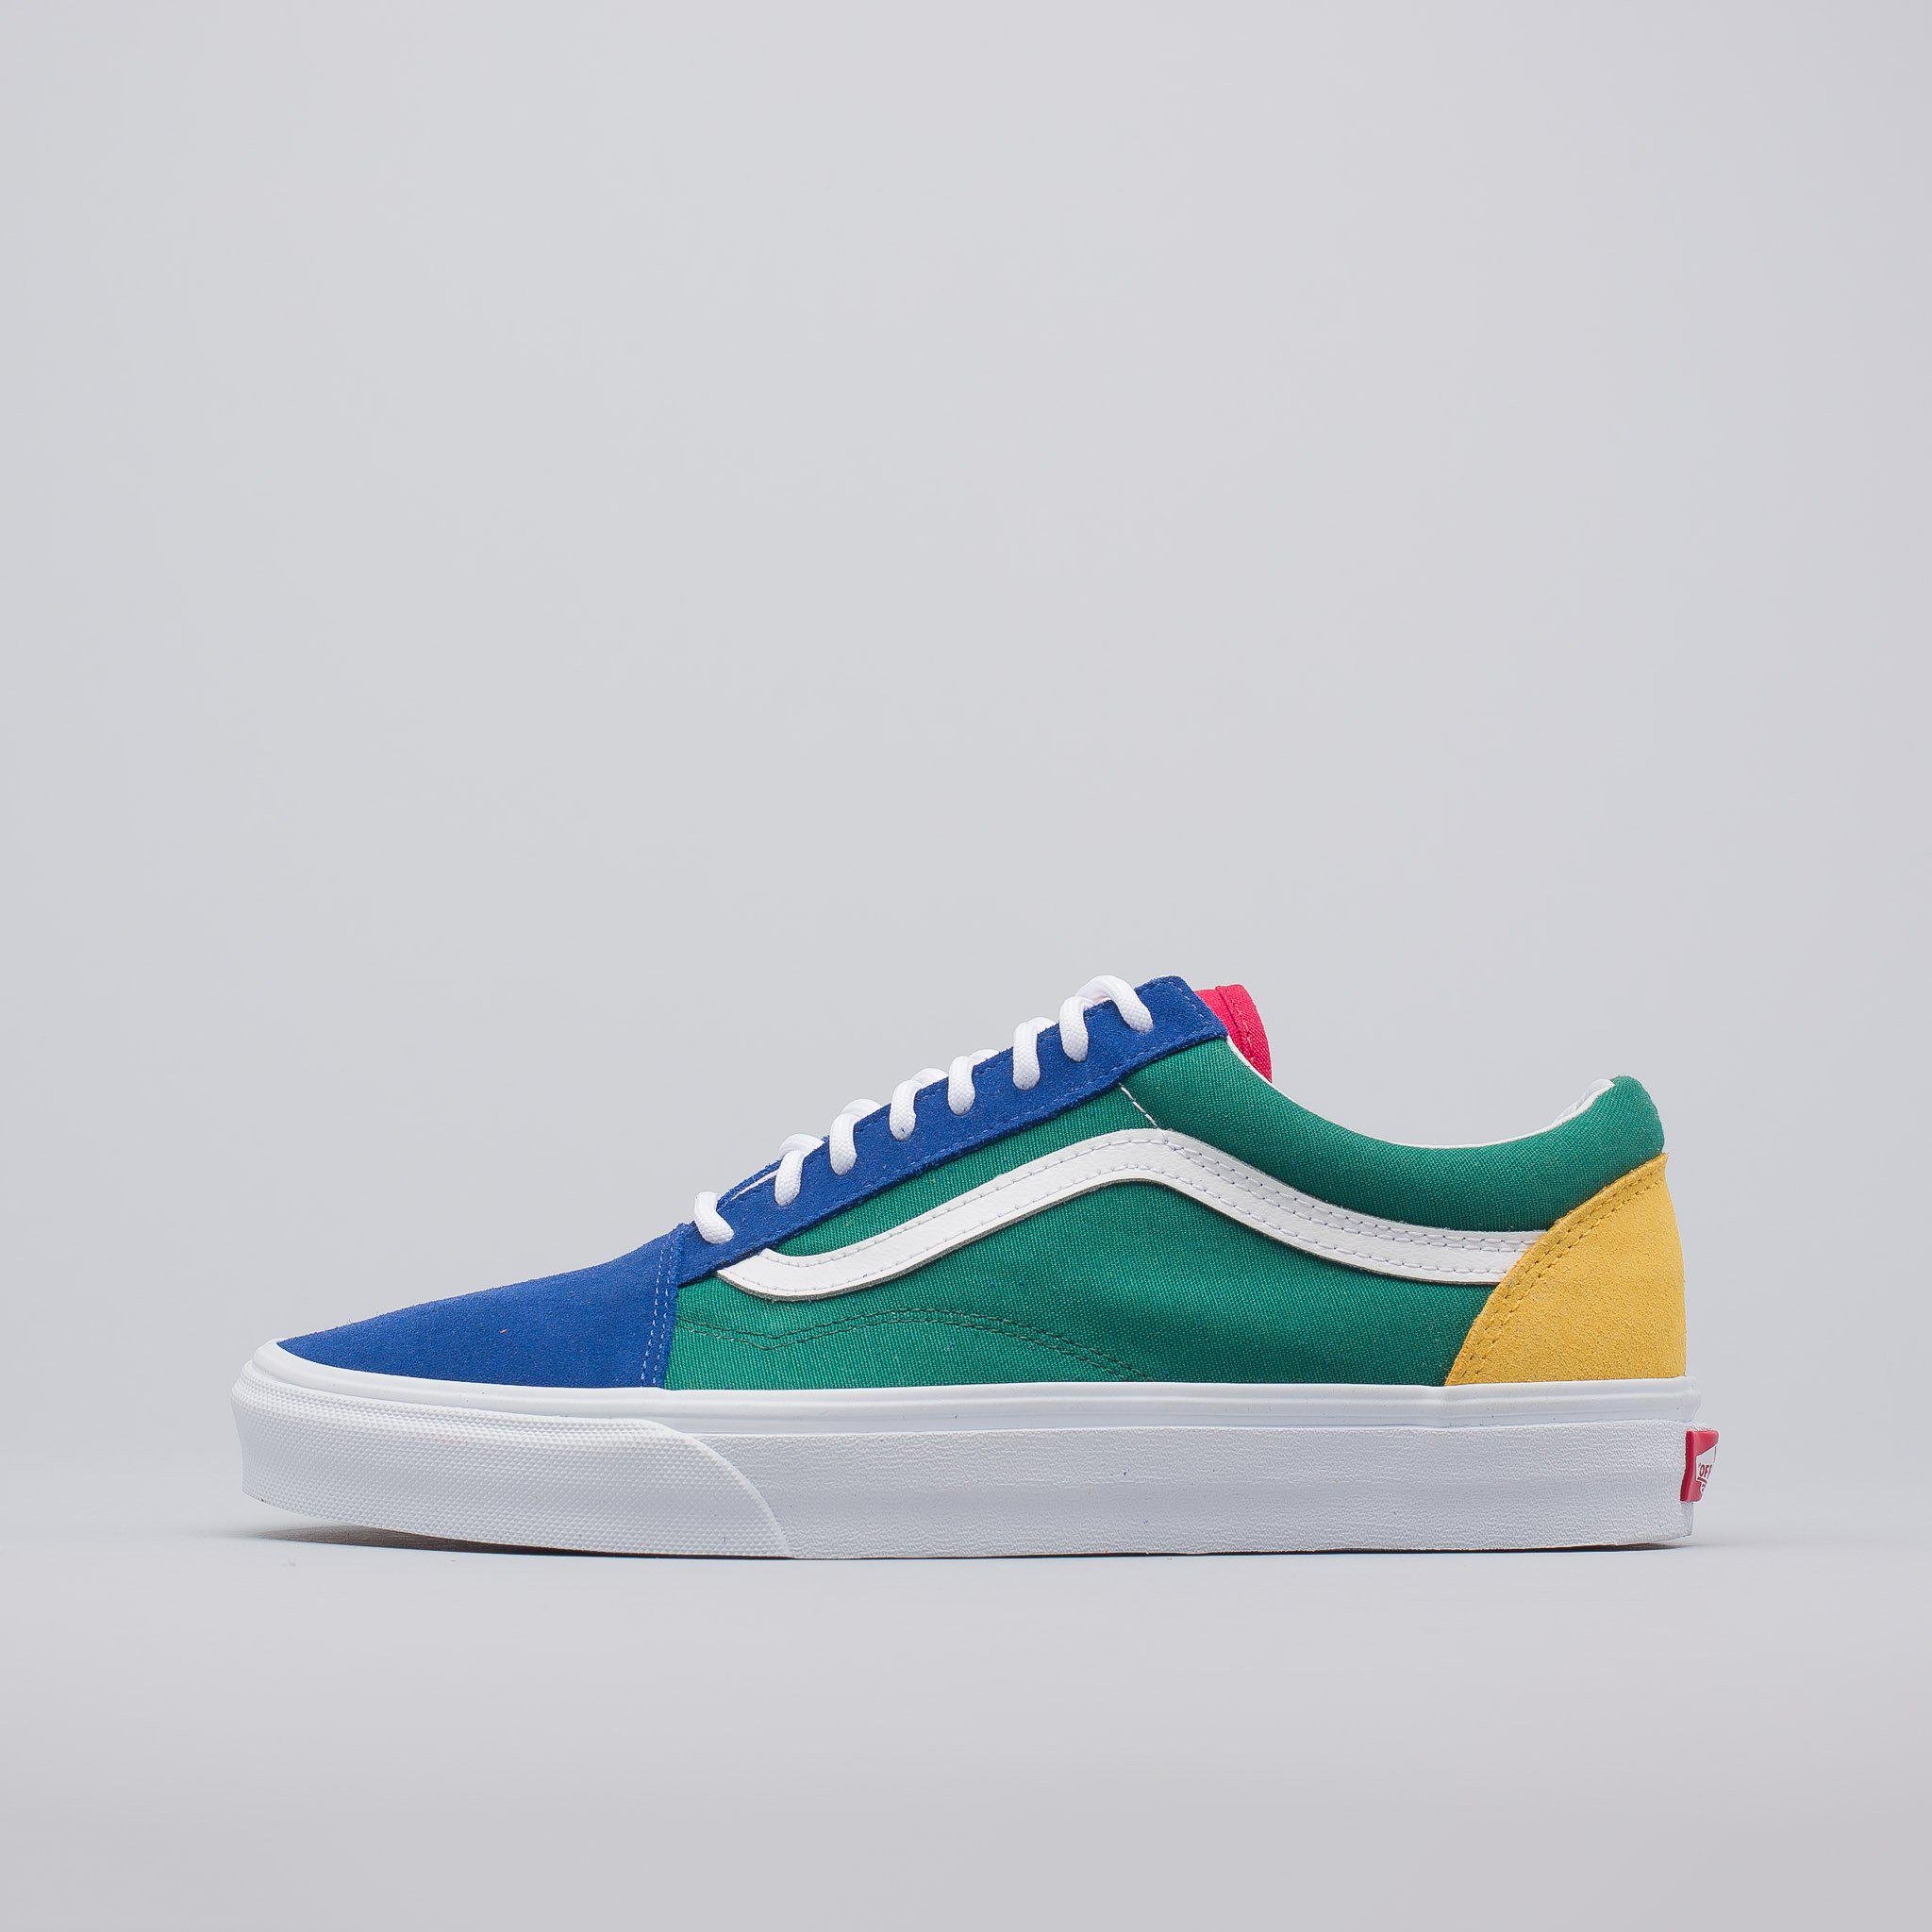 blue and green vans - 61% OFF 